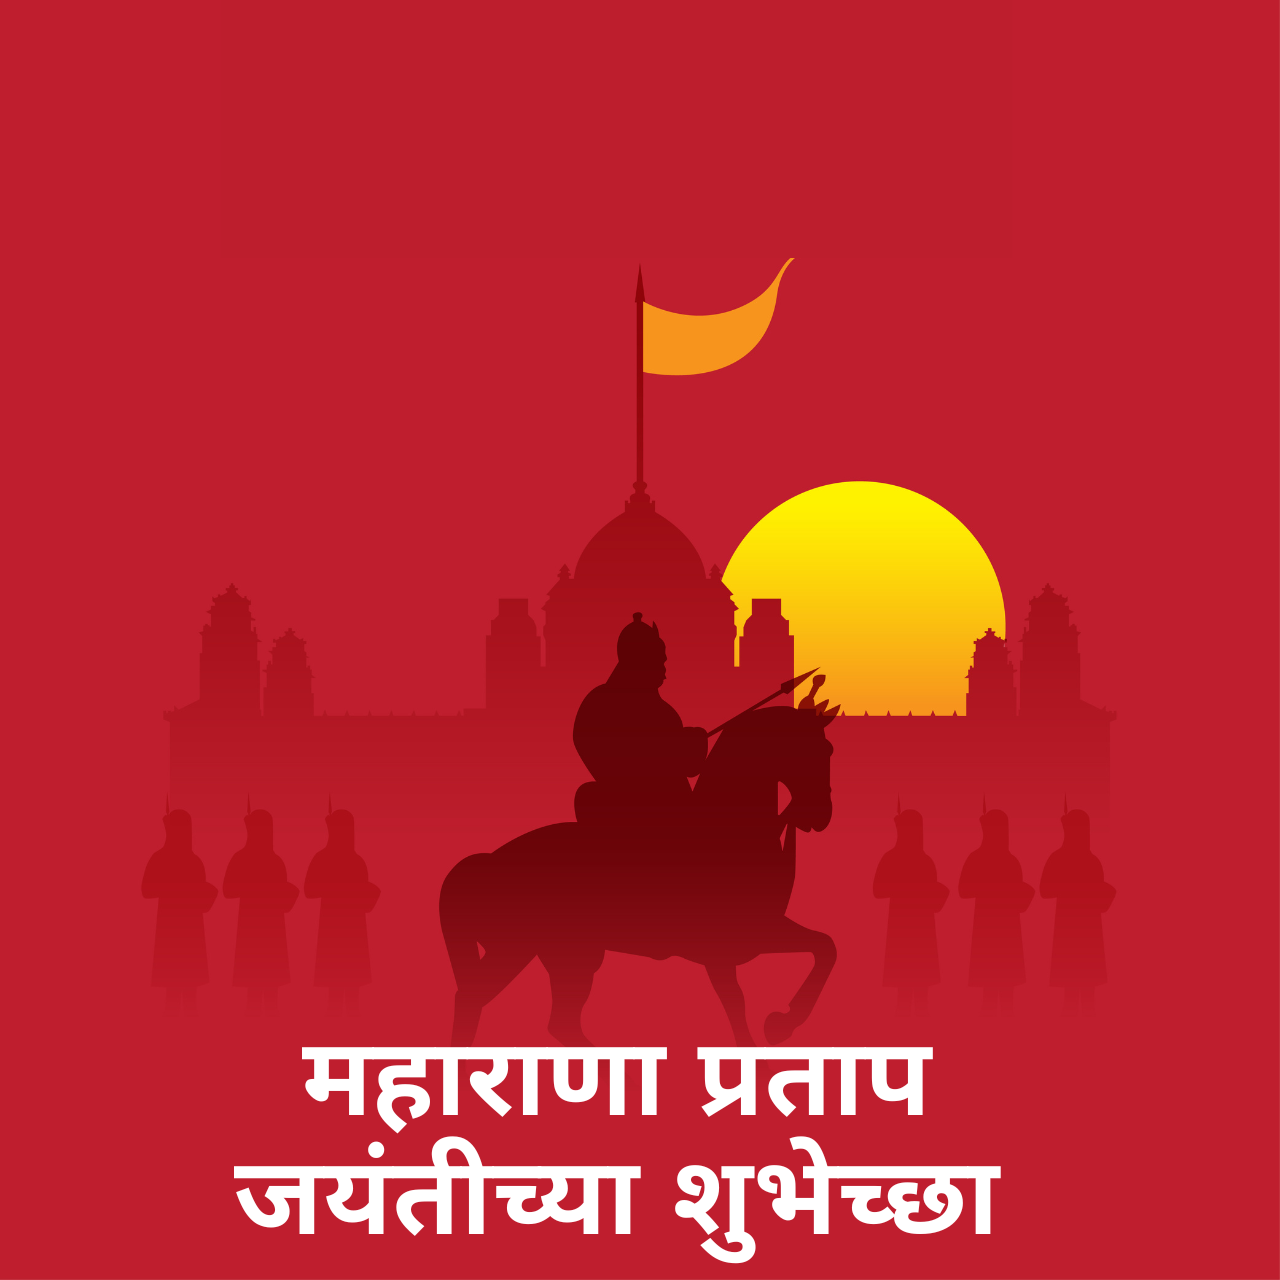 Maharana Pratap Jayanti 2023 Wishes in Marathi,: Quotes, Greetings, Images, HD Wallpapers, Messages, banners, Posters, WhatsApp DP, Greetings, Sayings, and Shayari